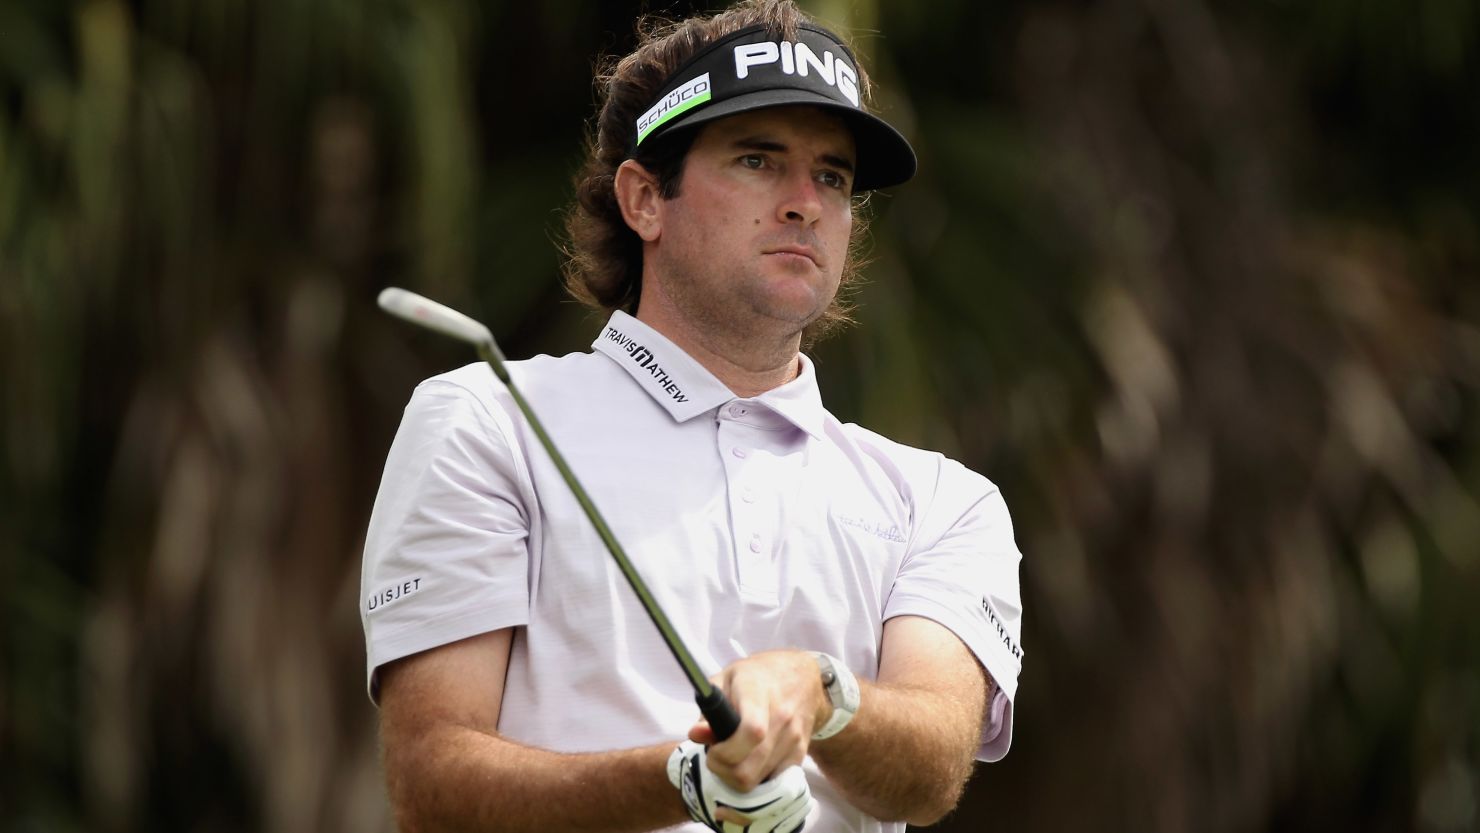 Bubba Watson stormed into the lead at the WGC-Cadillac Championship with a 10-under par round of 62 on Friday.